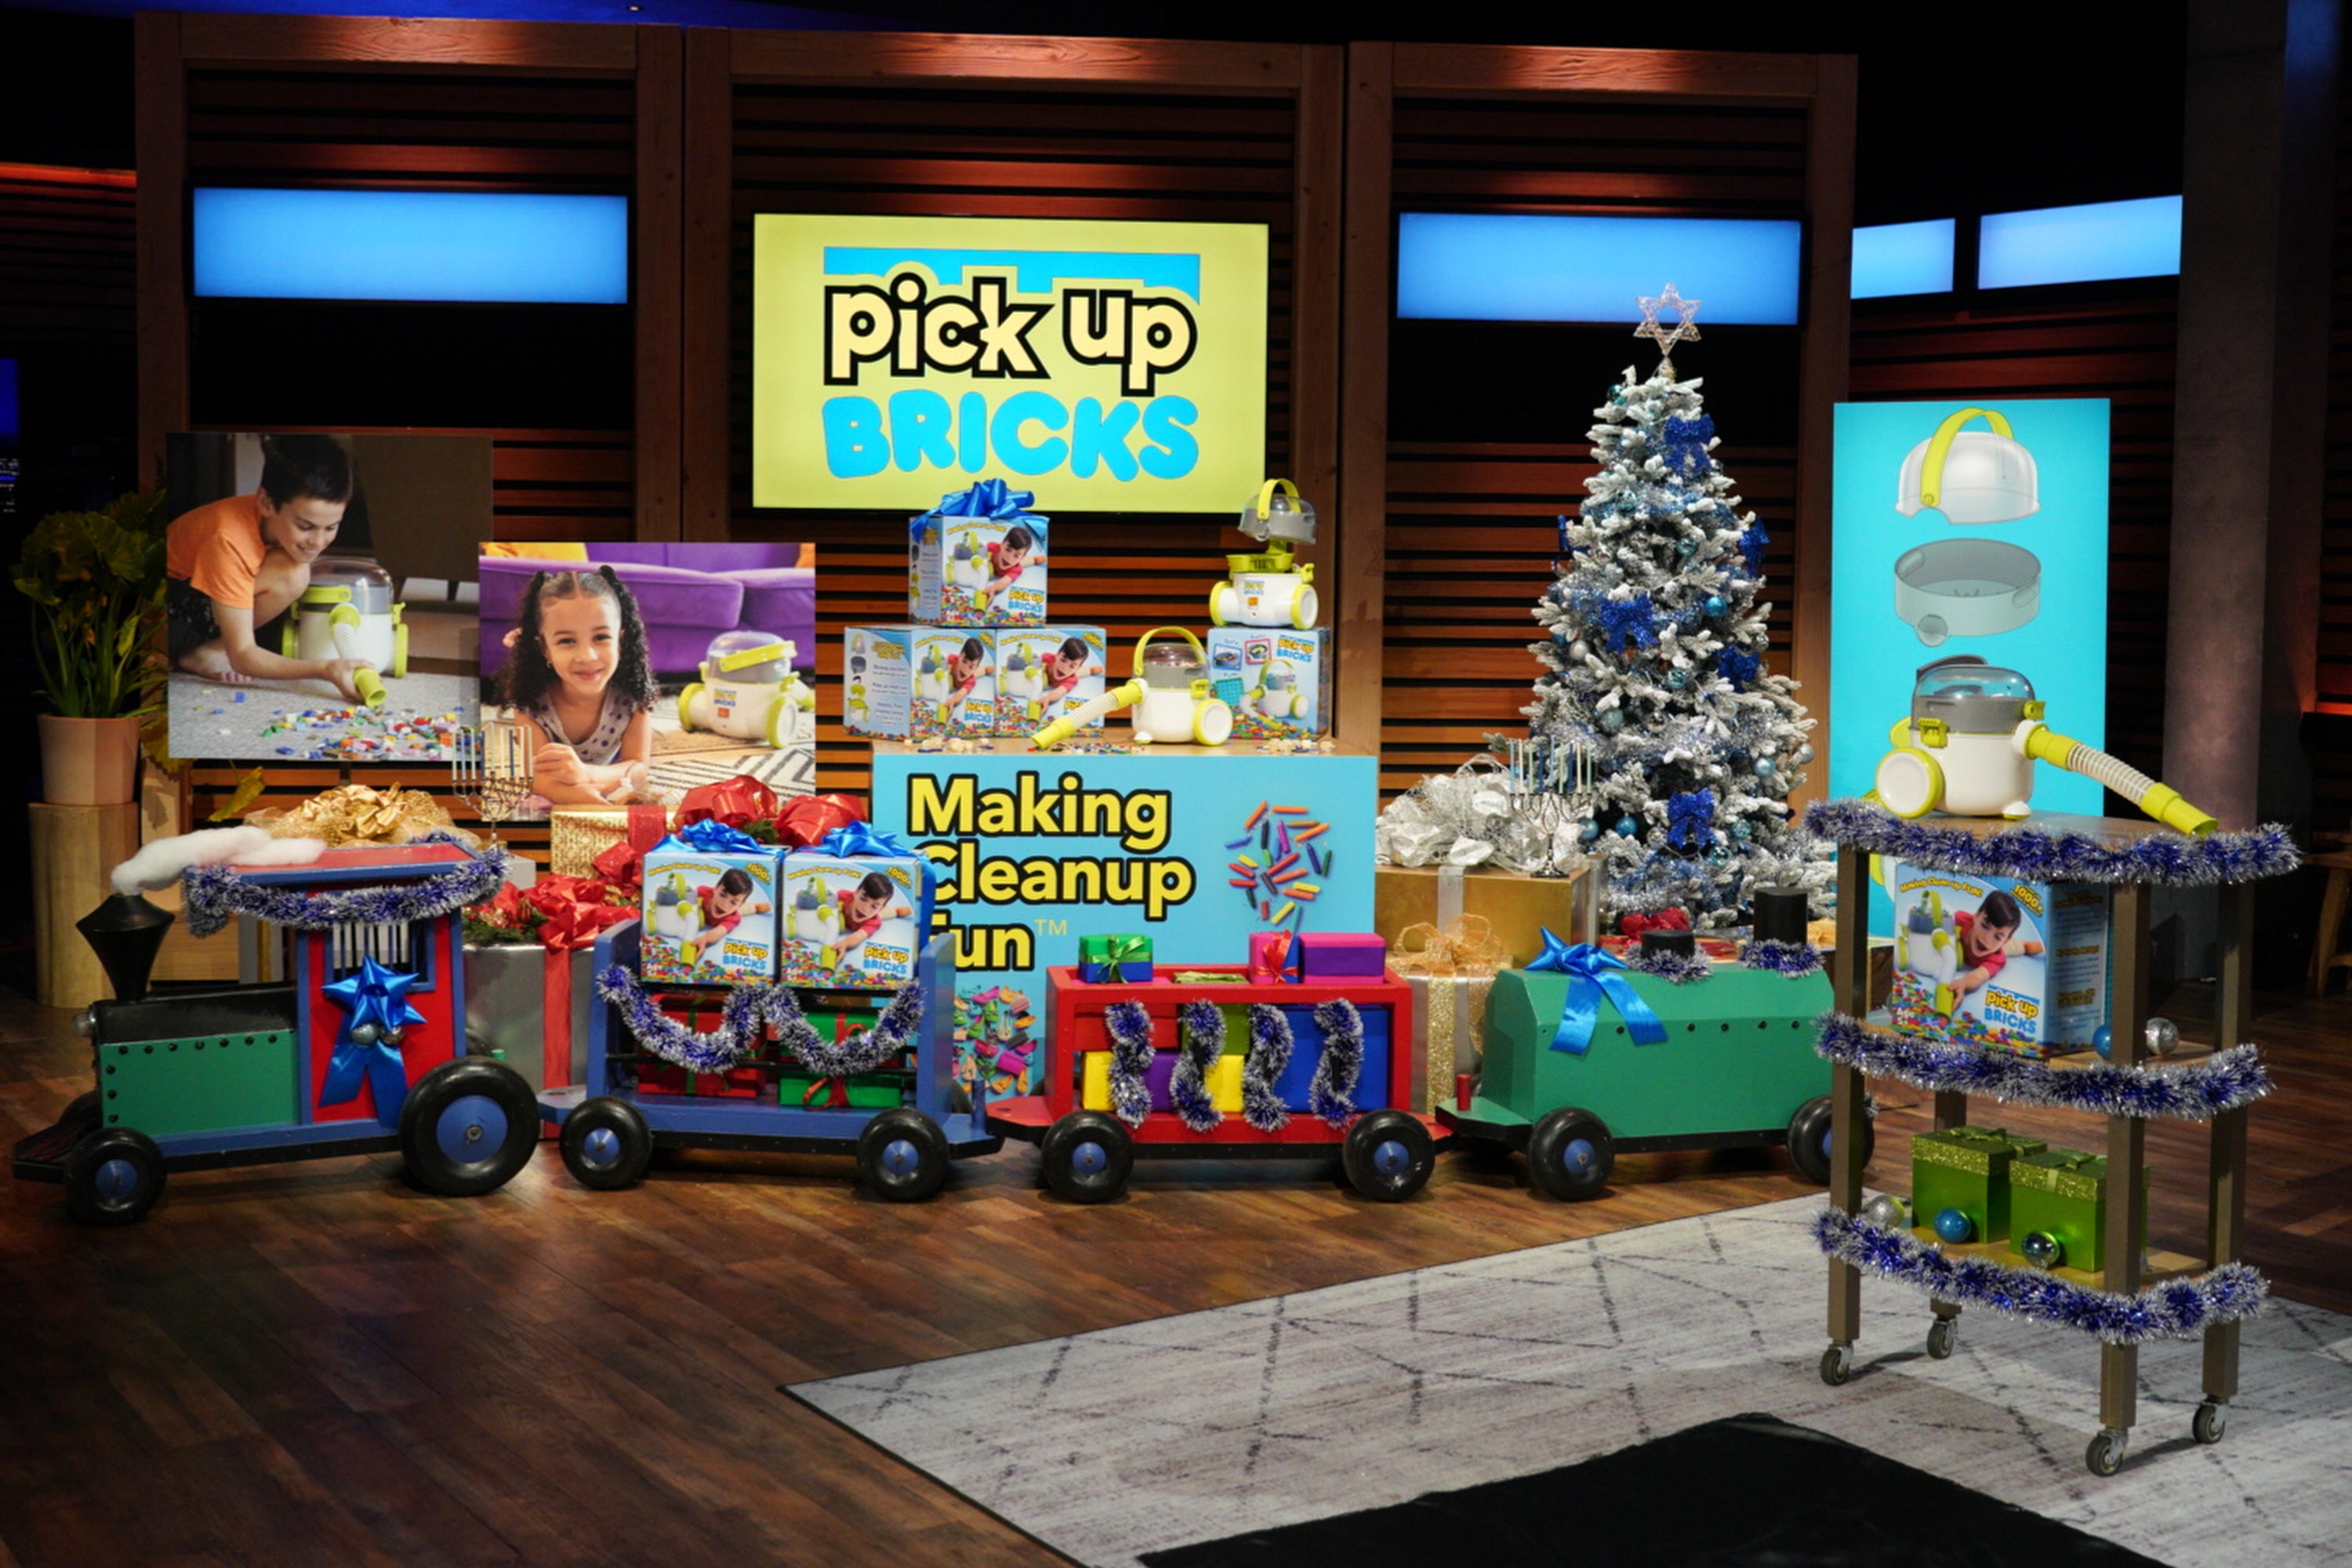 The Pick-Up Bricks display on the Shark Tank set with holiday flourishes